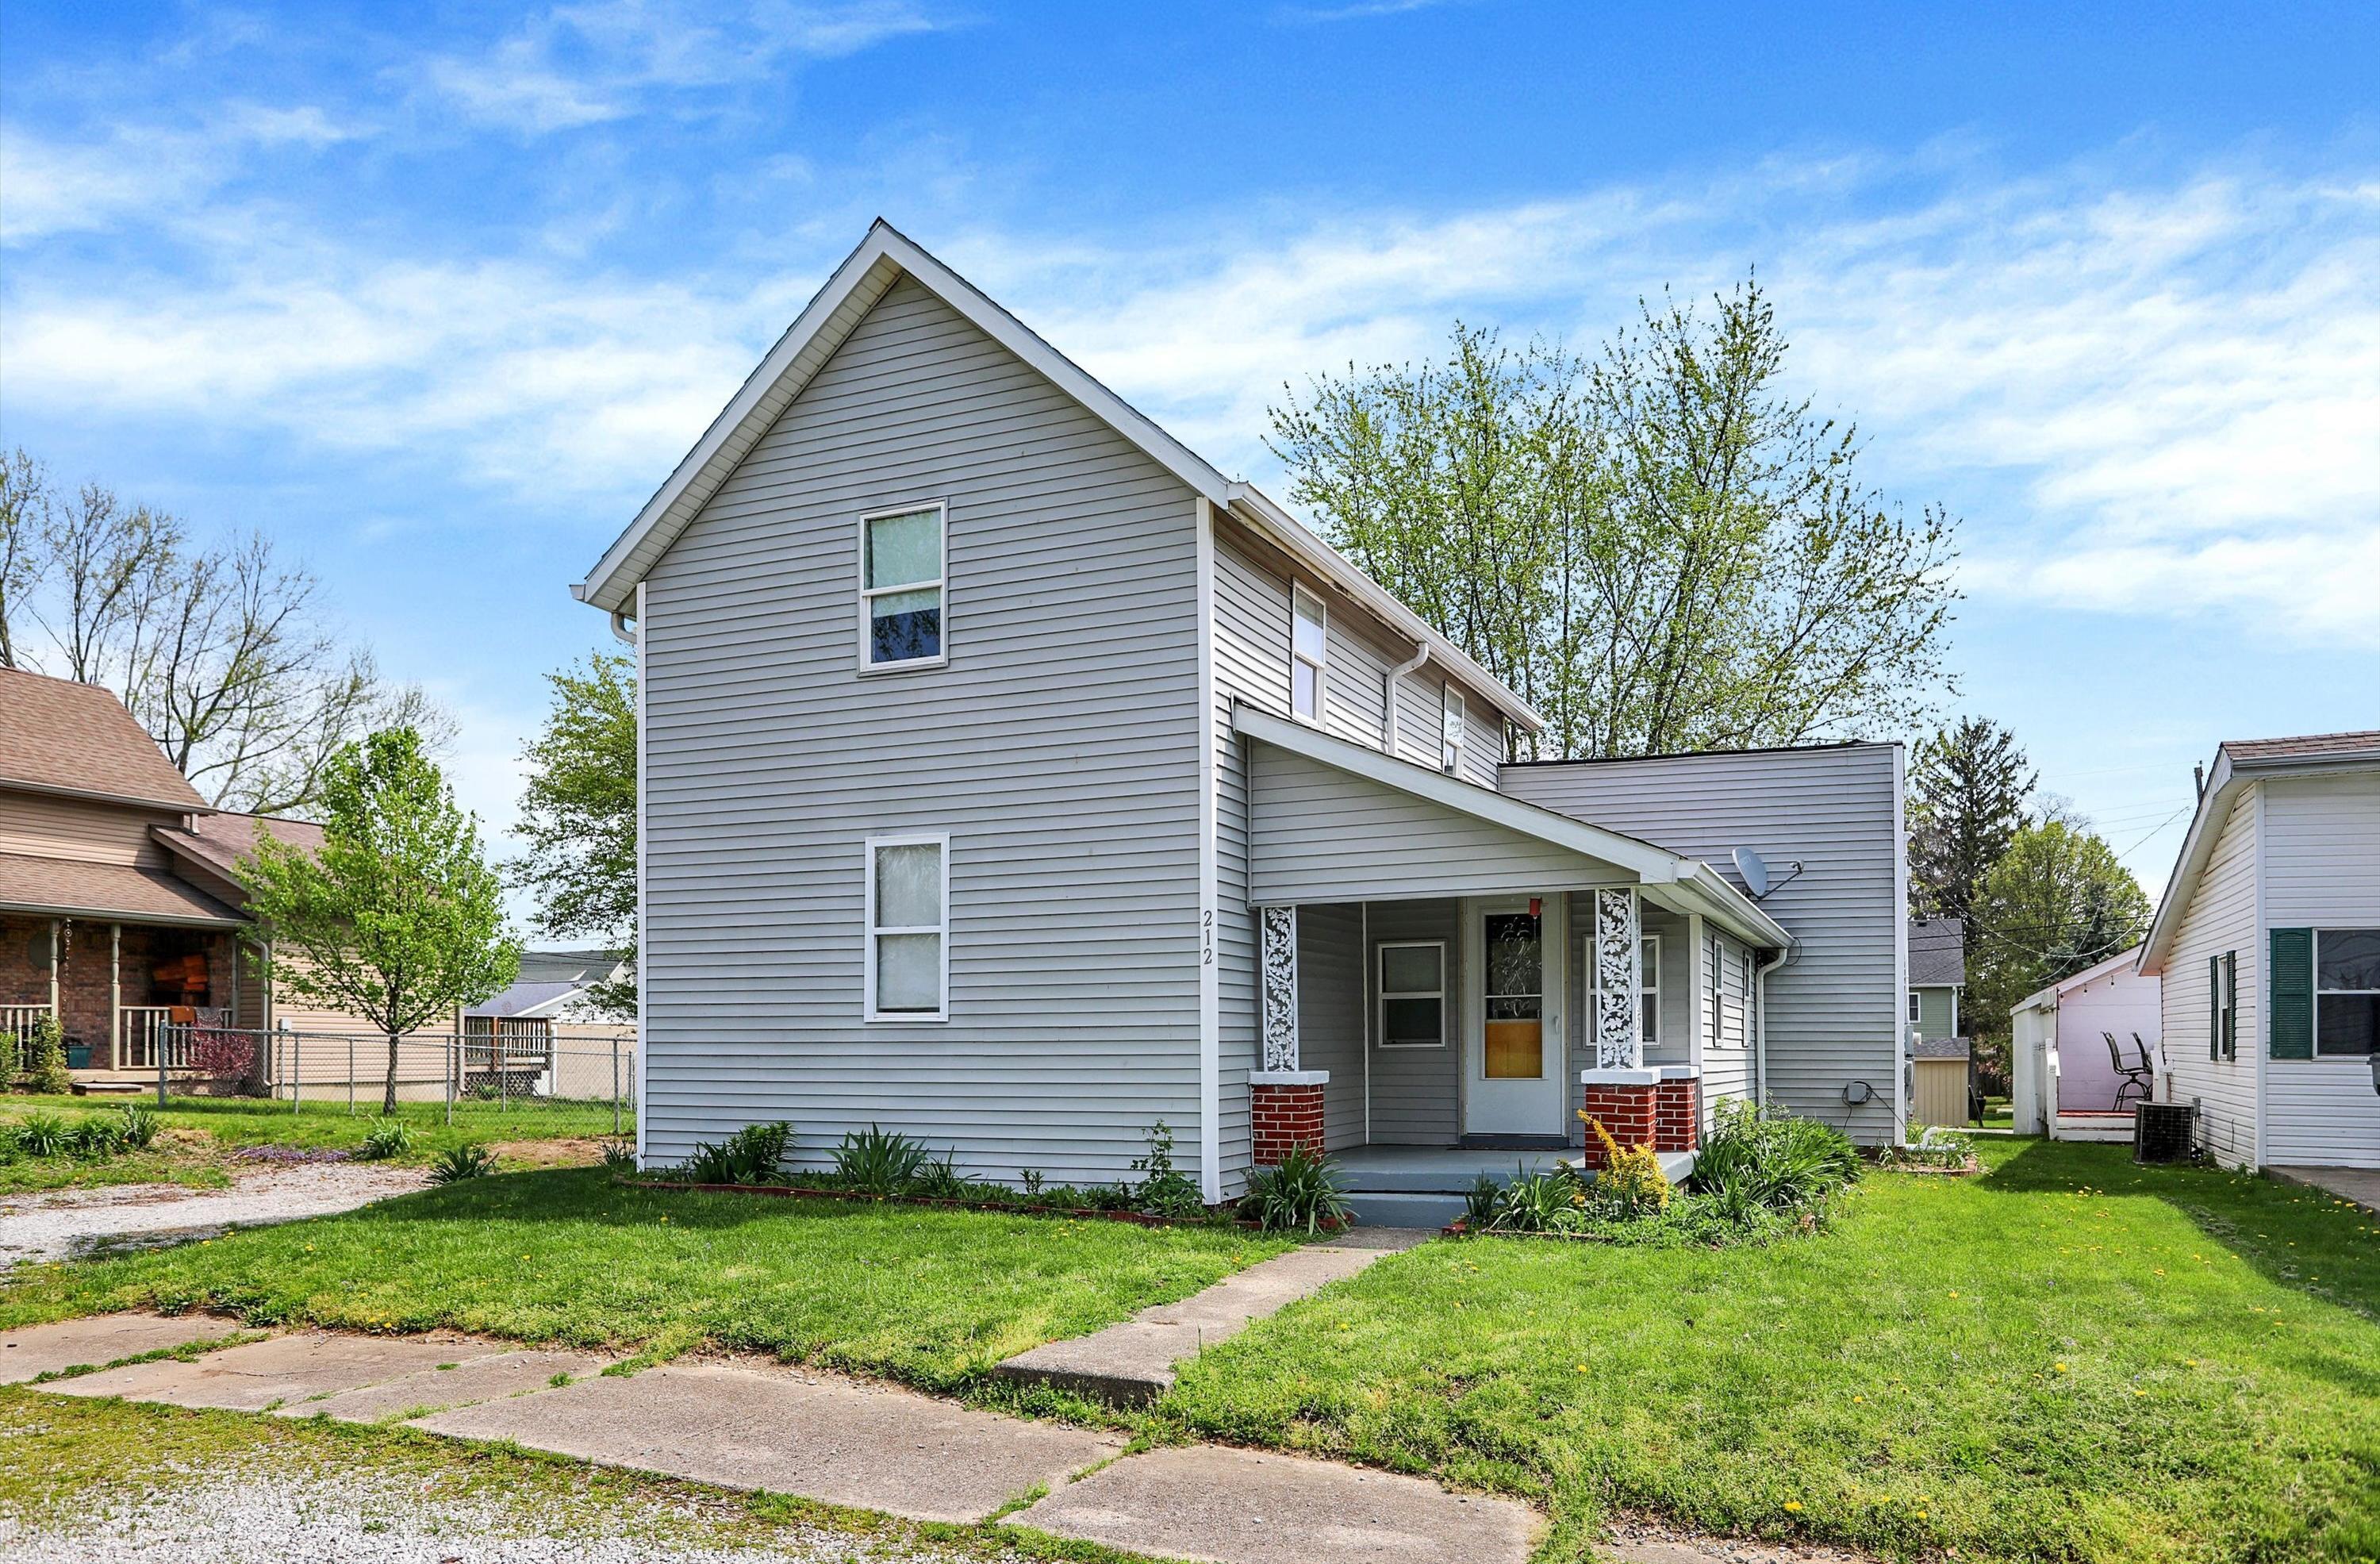 Photo one of 212 Illinois St Shirley IN 47384 | MLS 21974296